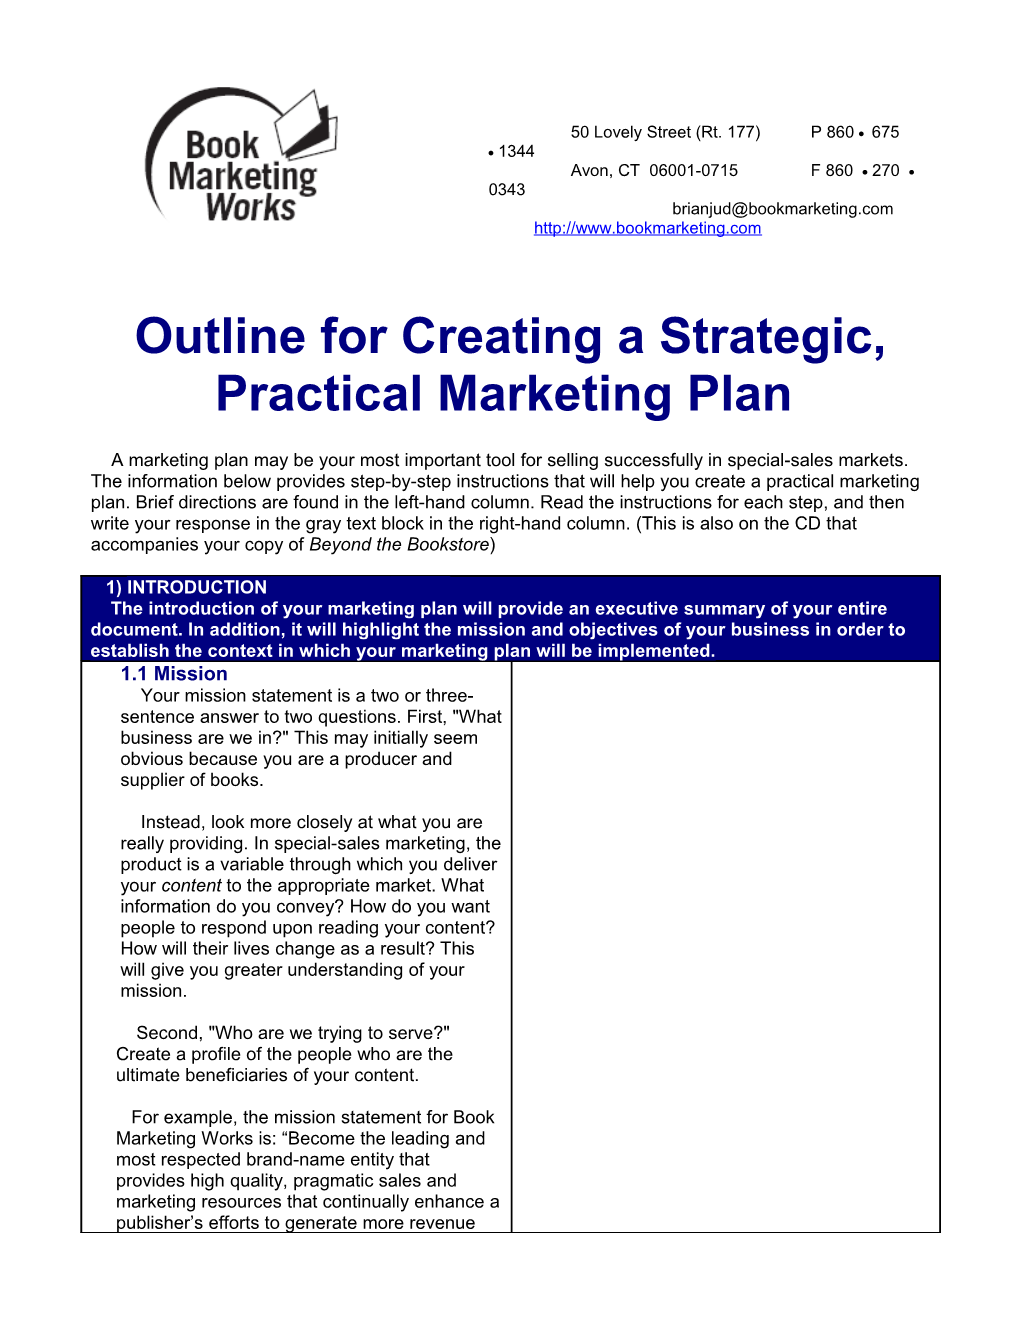 Outline for Creating a Strategic, Practical Marketing Plan